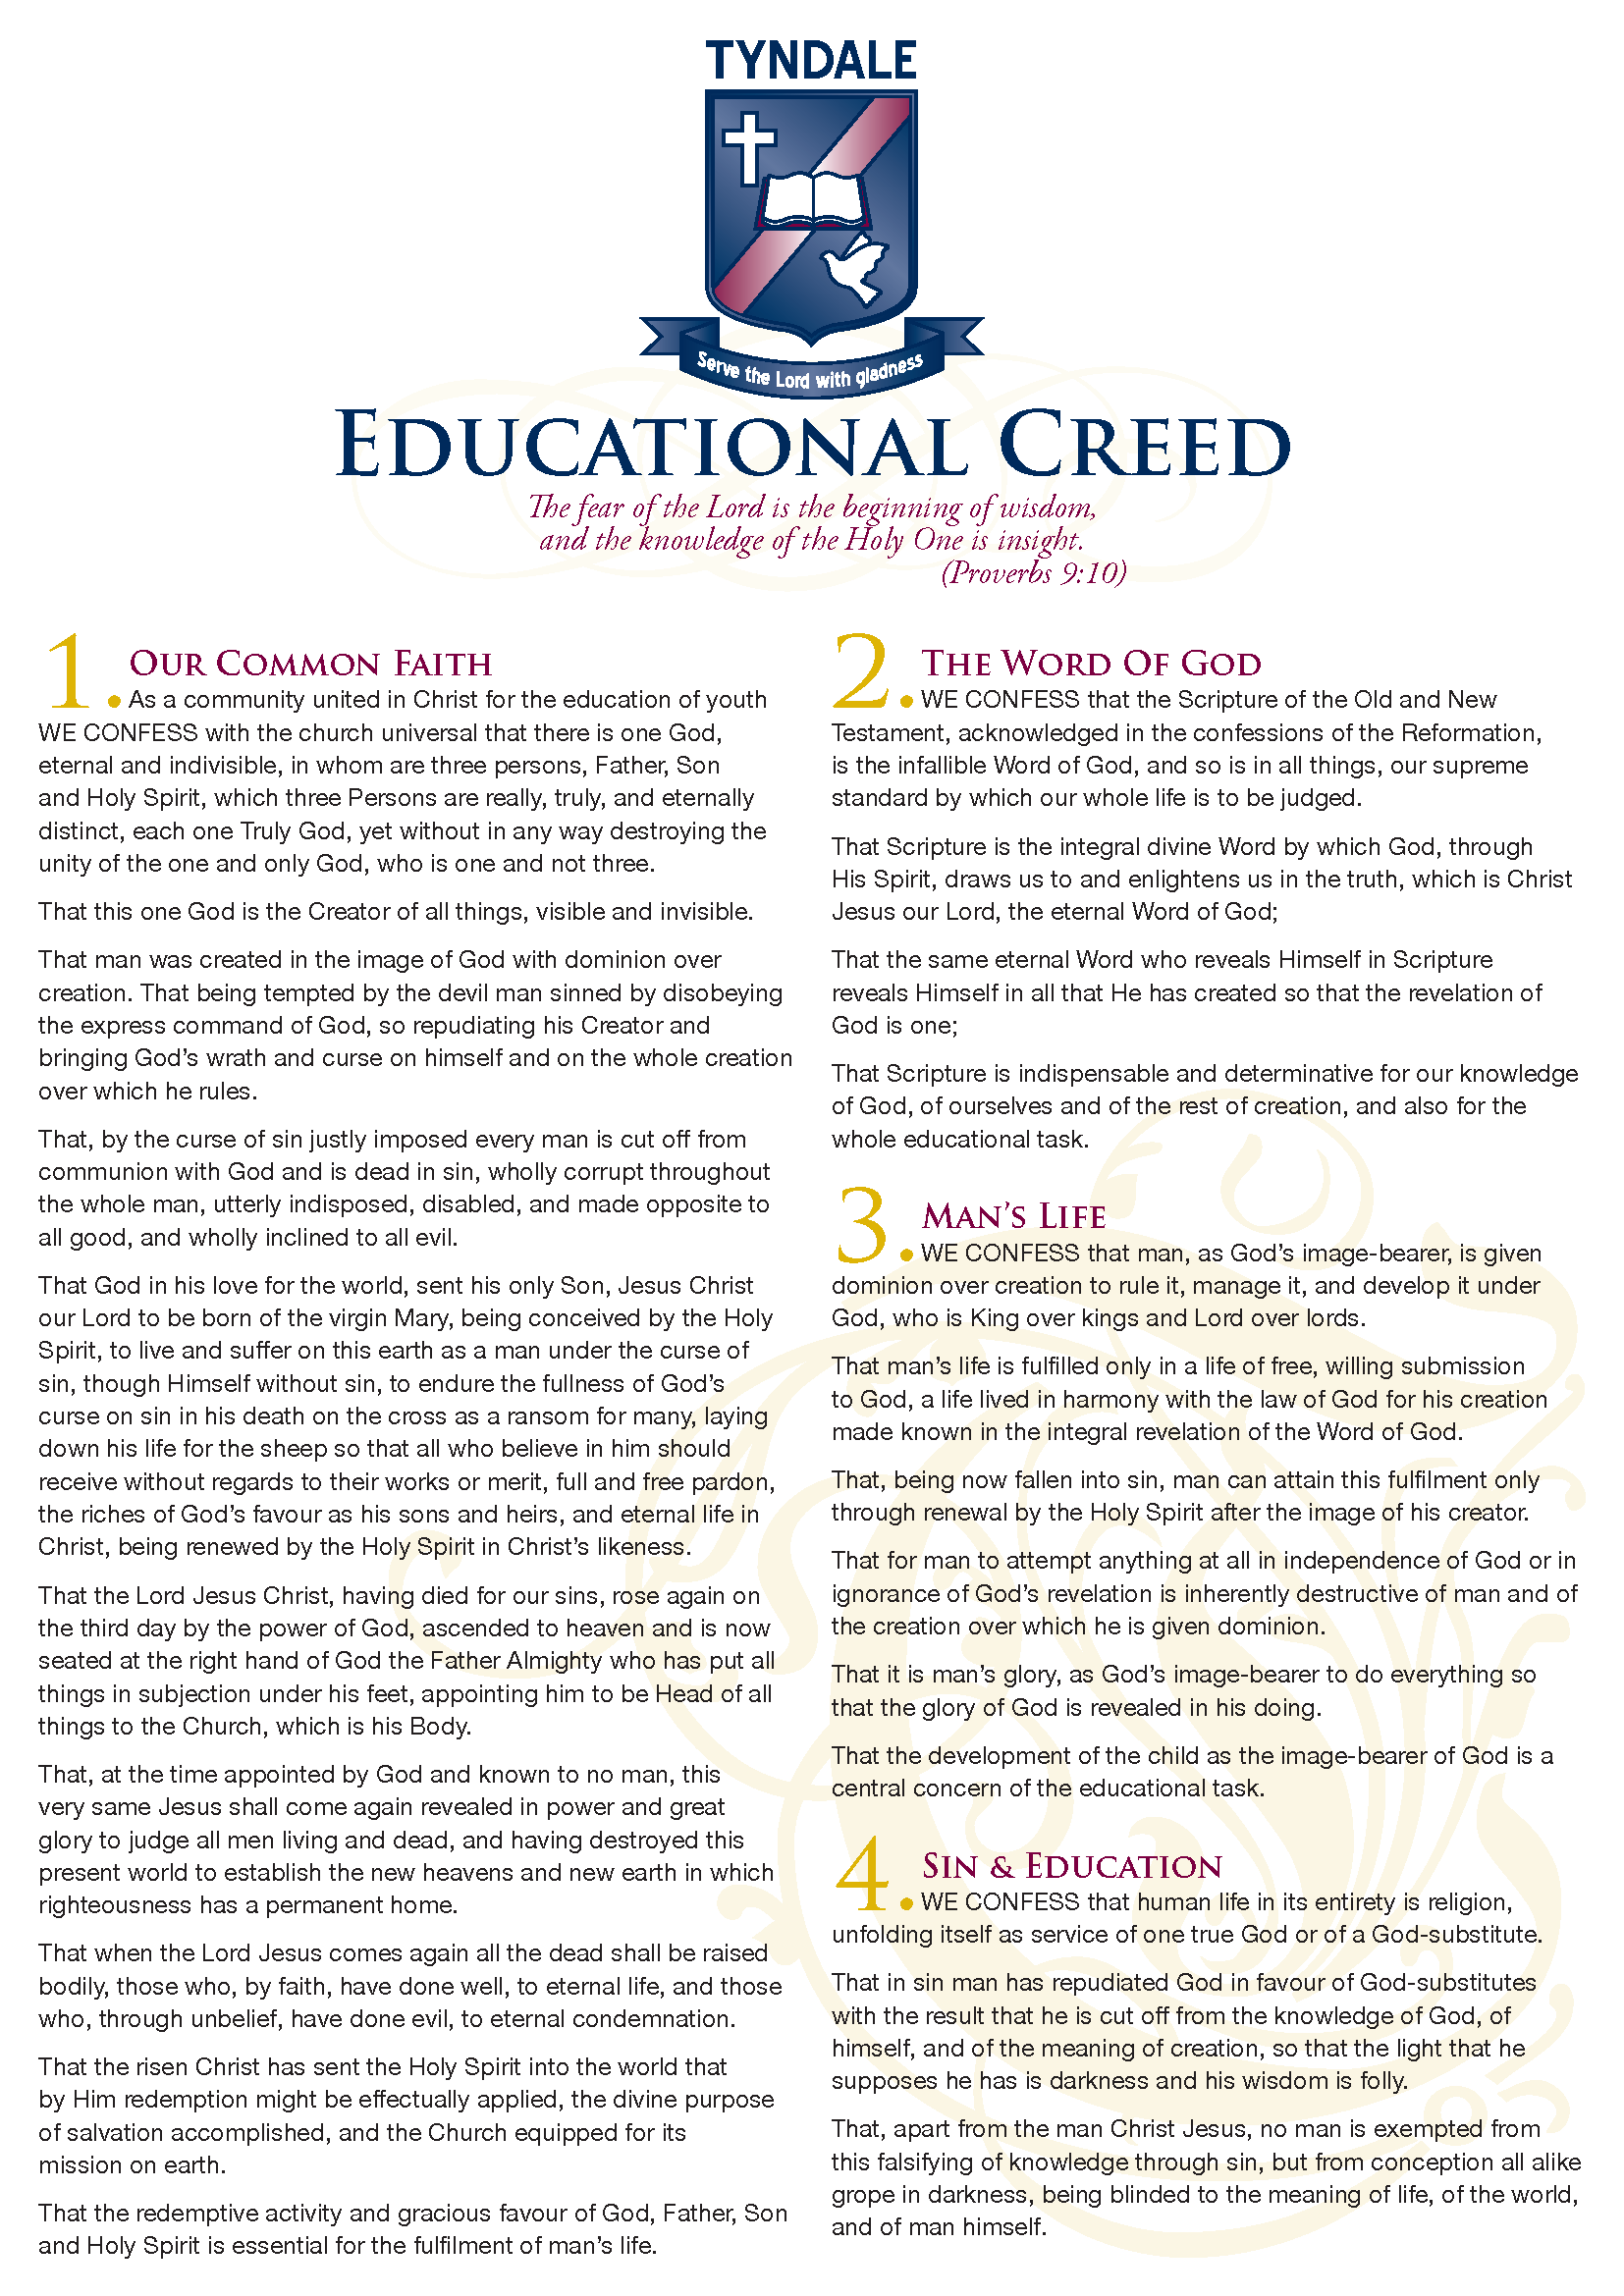 Tyndale Educational Creed Page 1